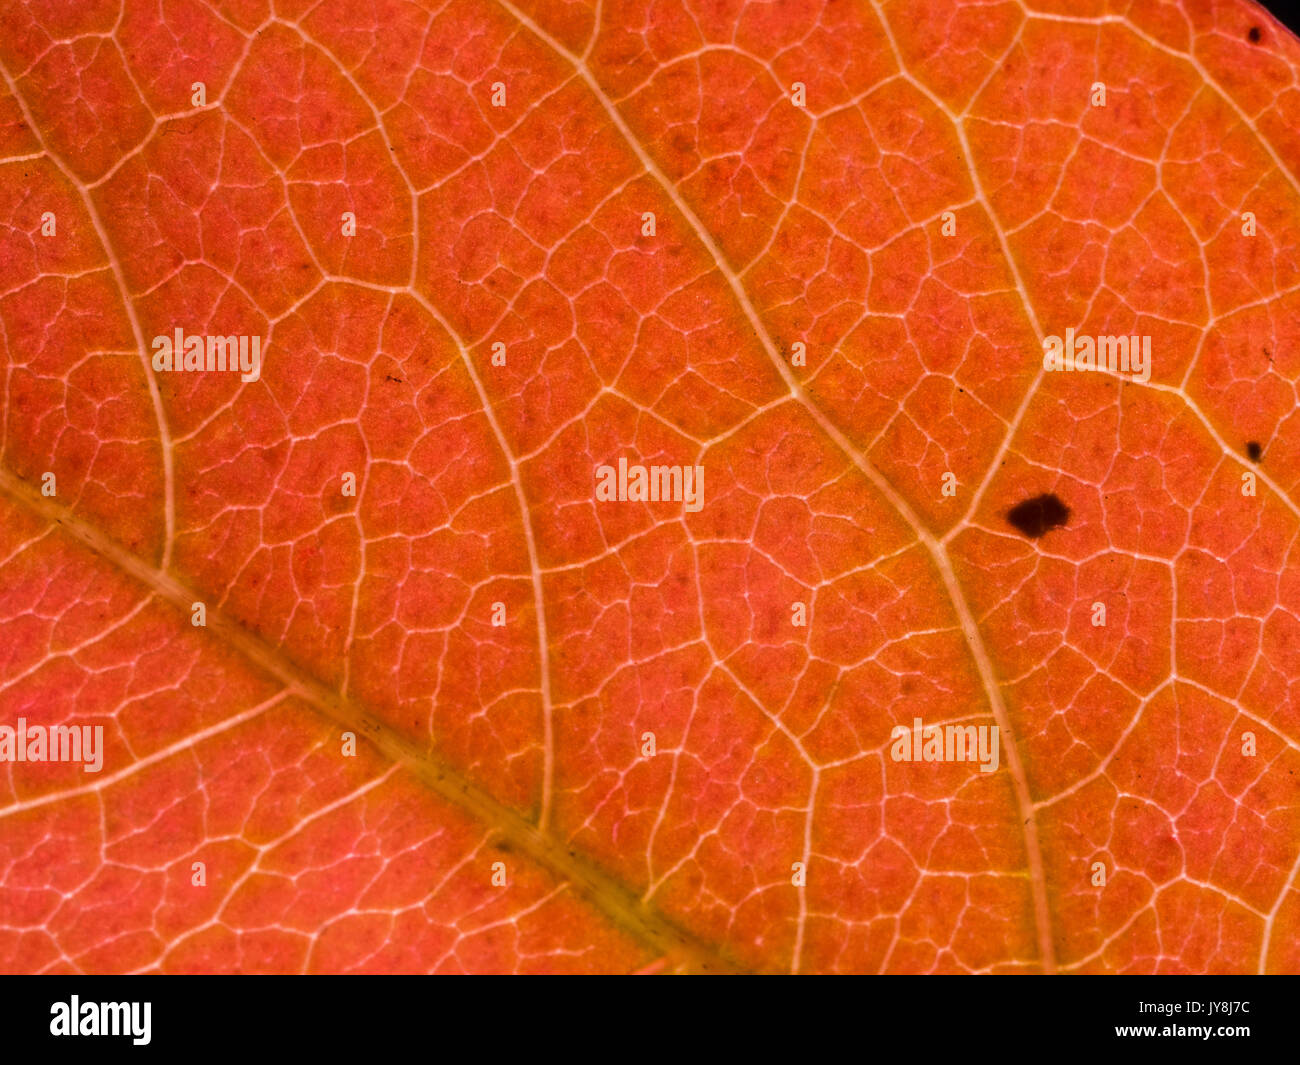 London, UK. Abstract detail of autumnal leaf. Stock Photo